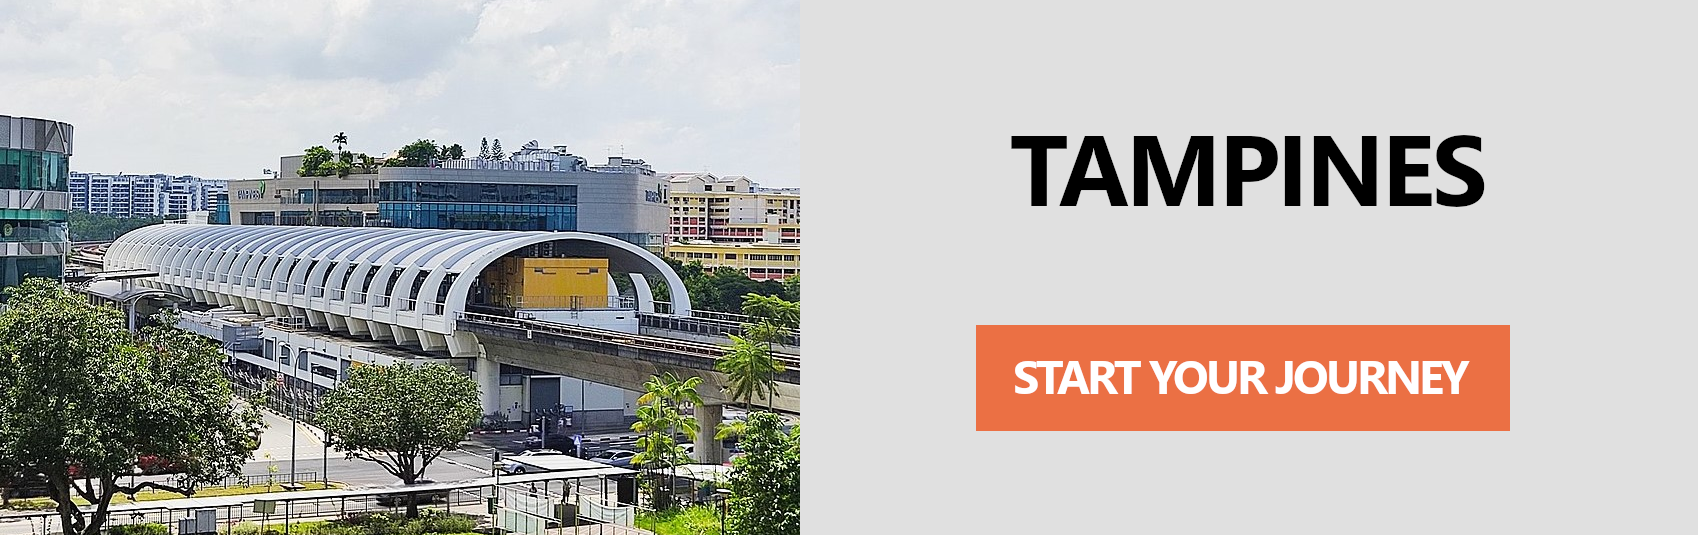 Tampines Story Map